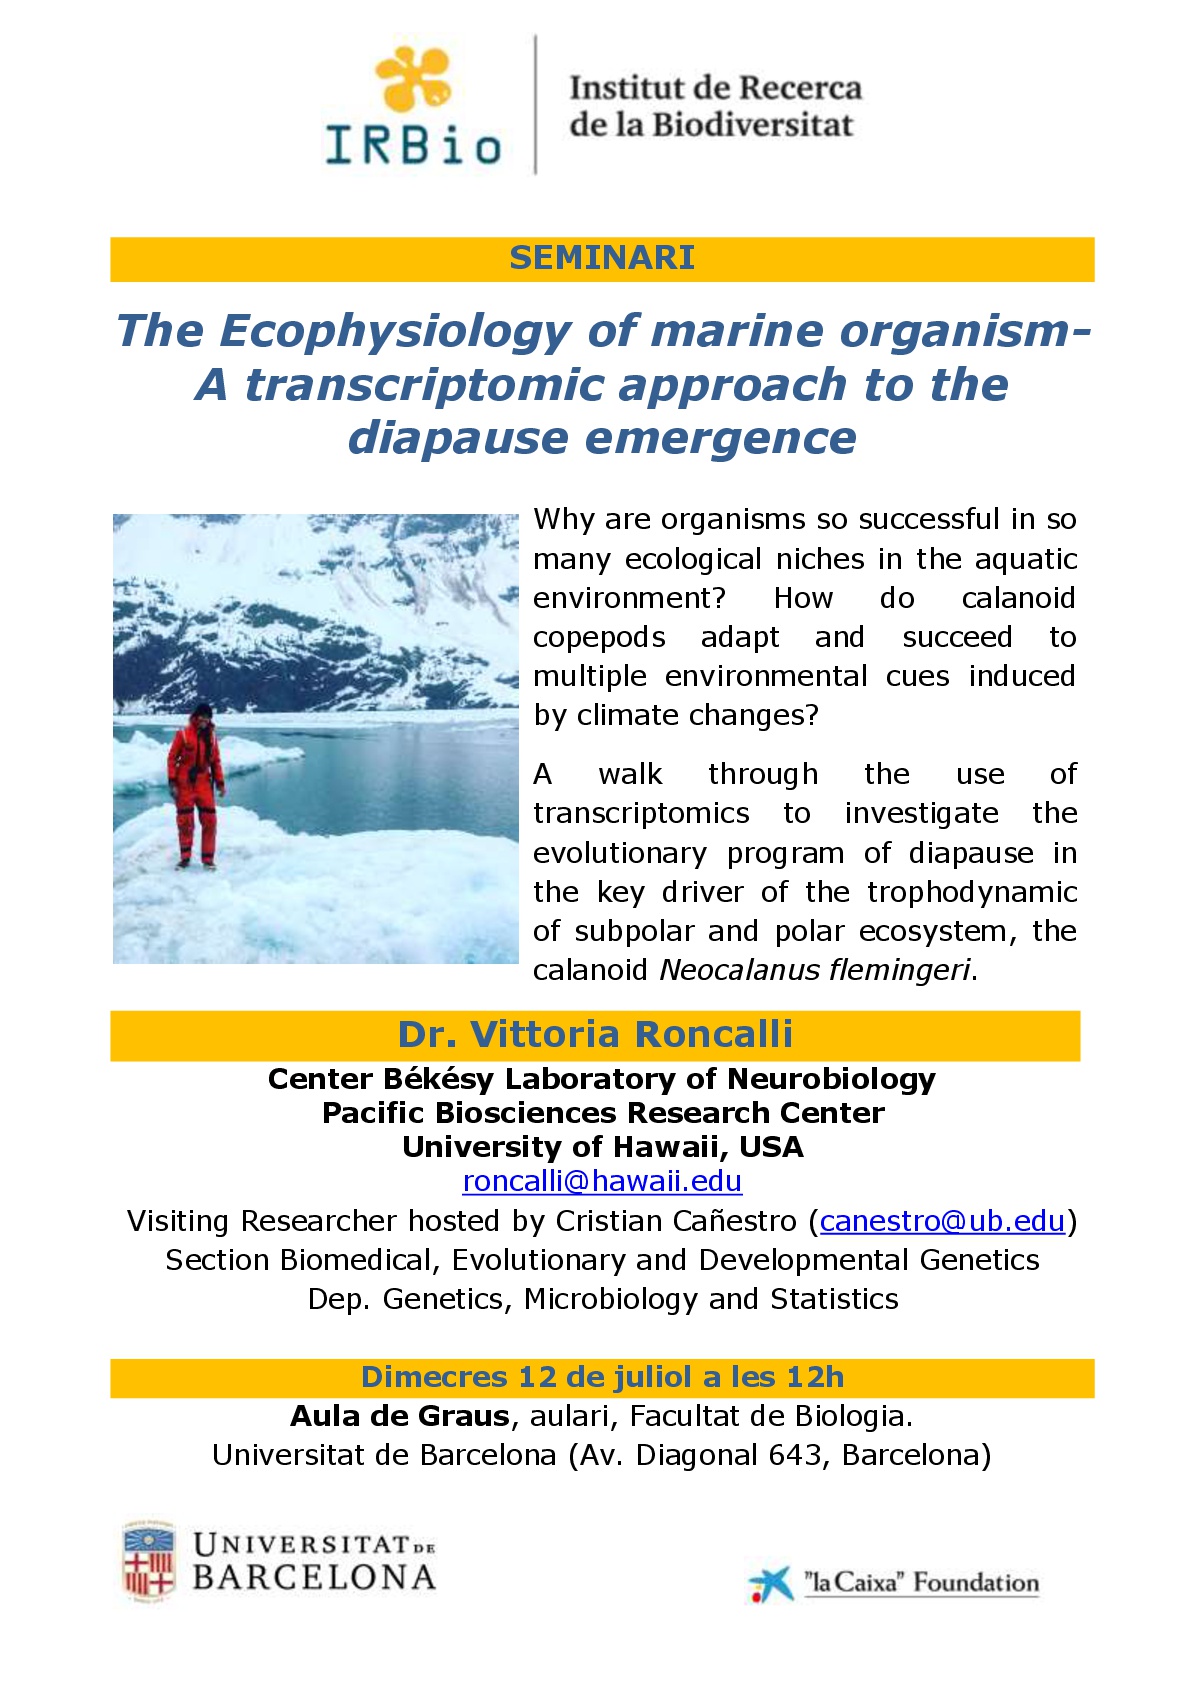 The Ecophysiology of marine organism-A transcriptomic approach to the diapause emergence 